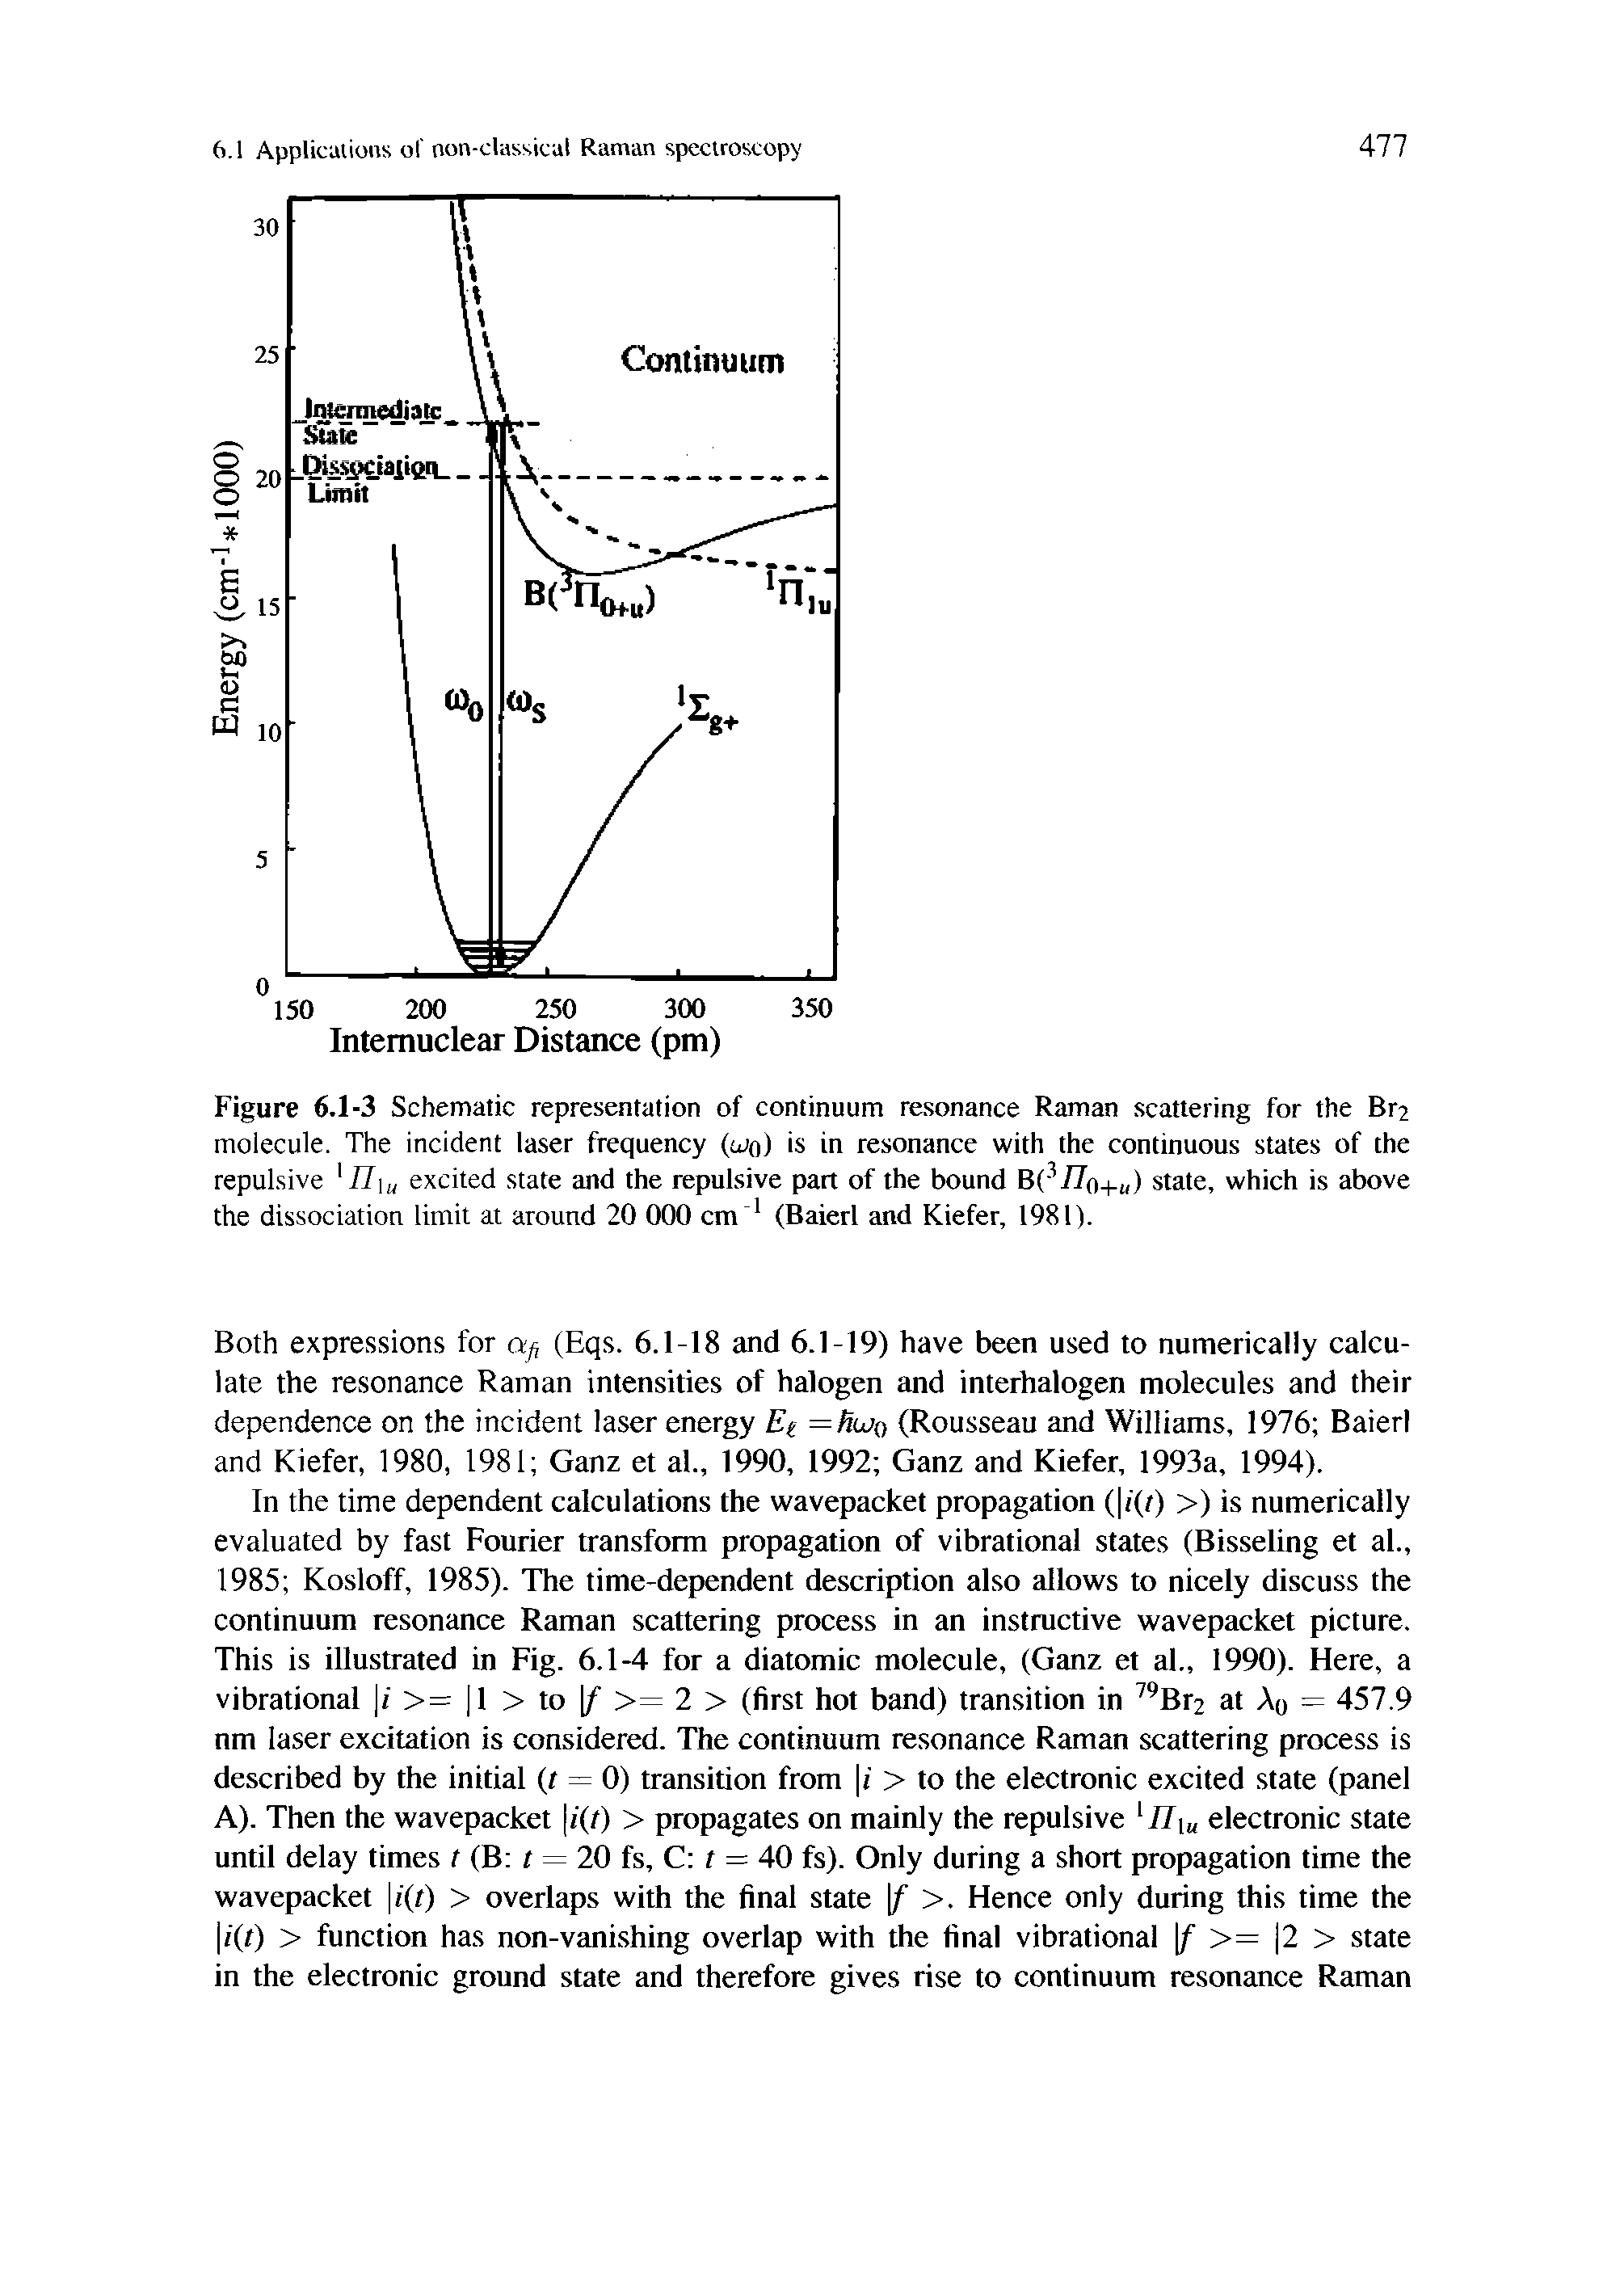 Figure 6.1-3 Schematic representation of continuum resonance Raman scattering for the Br2 molecule. The incident laser frequency (o o) is in resonance with the continuous states of the repulsive 77 excited state and the repulsive part of the bound B(- 77o-i- ) state, which is above the dissociation limit at around 20 000 cm (Baierl and Kiefer, 1981).